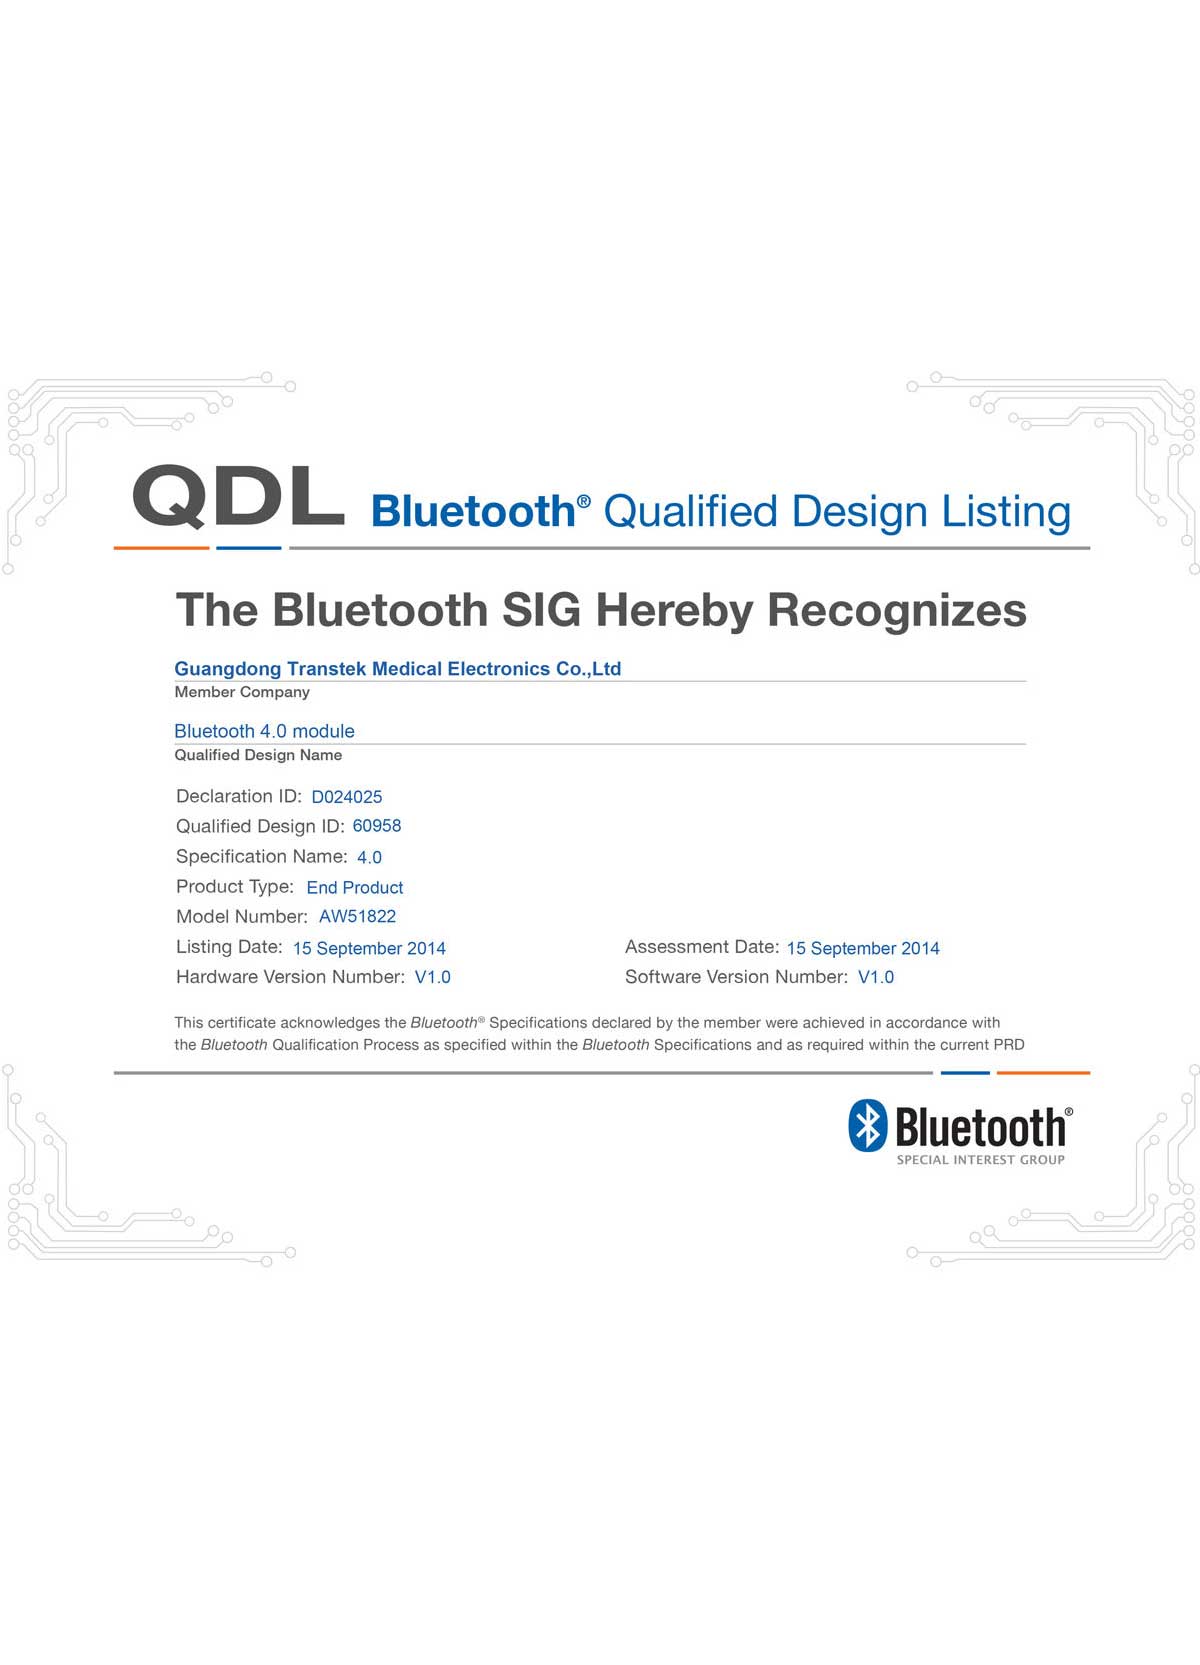 Bluetooth Certificate - AW51822